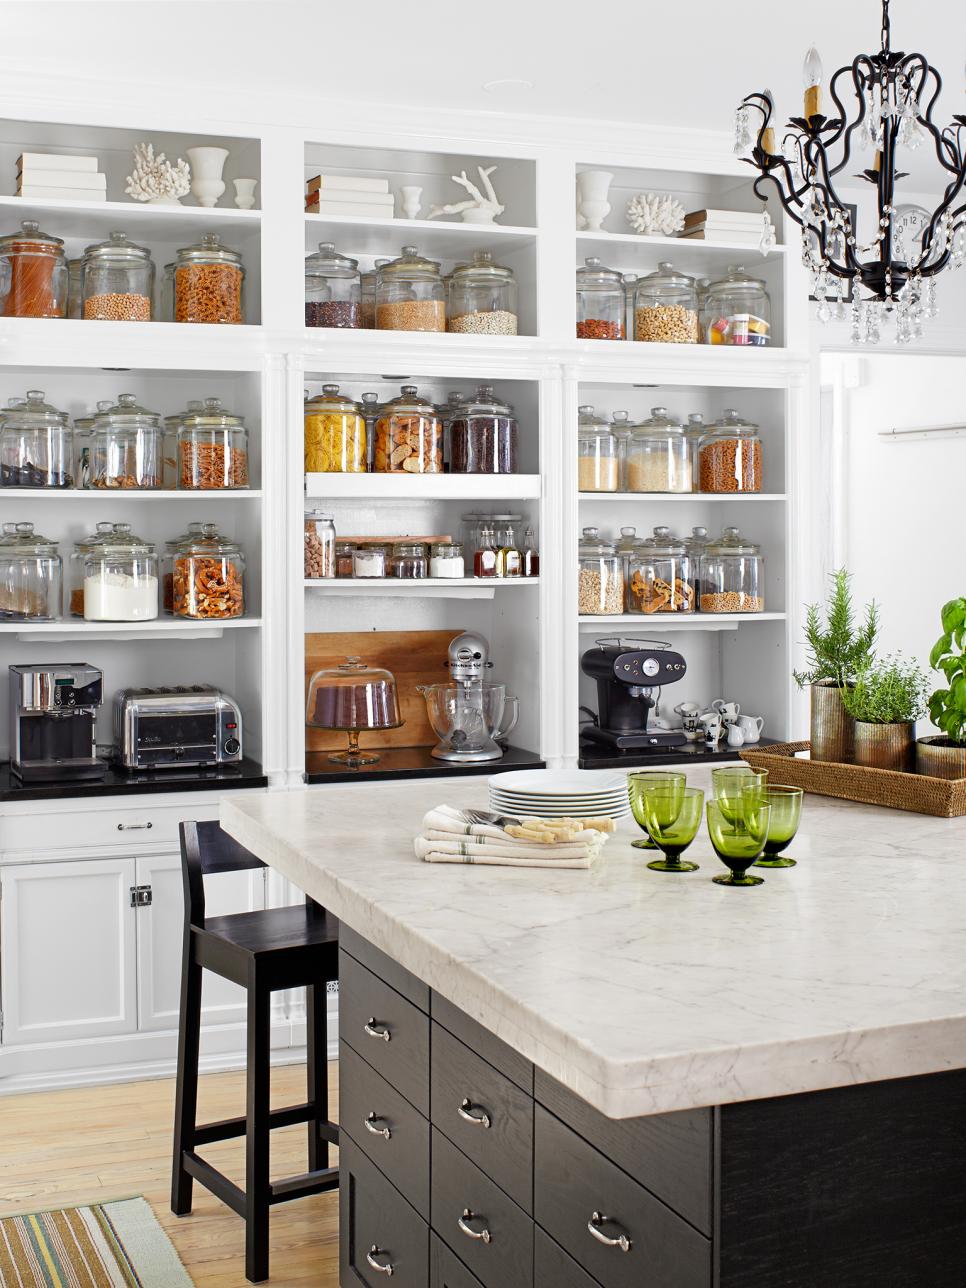 14 Easy Ways to Organize Small Stuff in the Kitchen